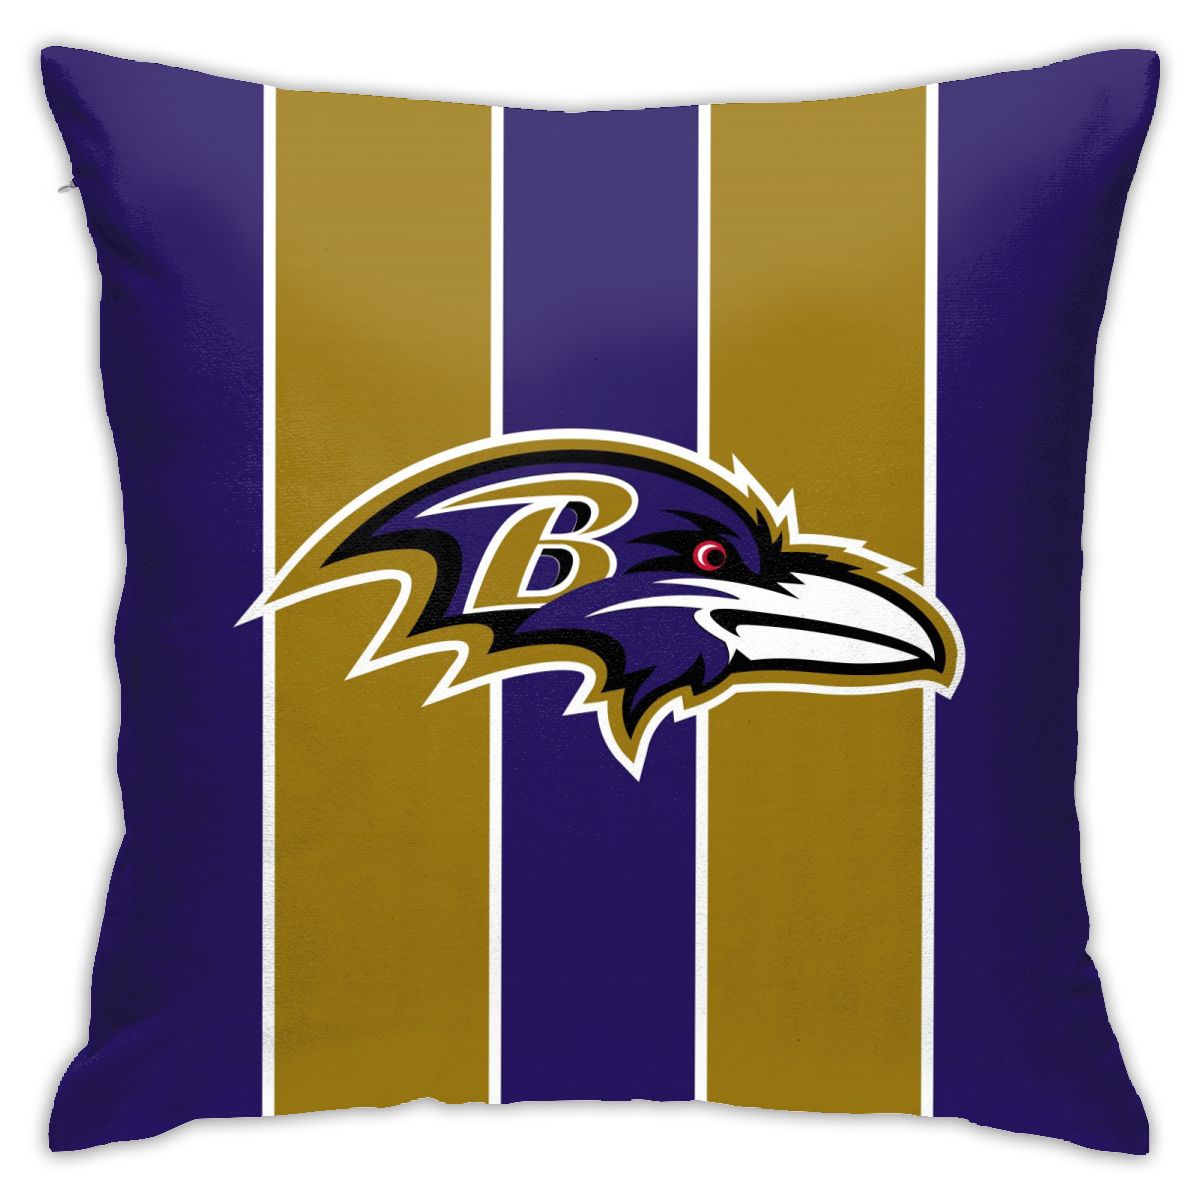 Custom Decorative Pillow 18inch*18inch 01- Purple Pillowcase Personalized Throw Pillow Covers